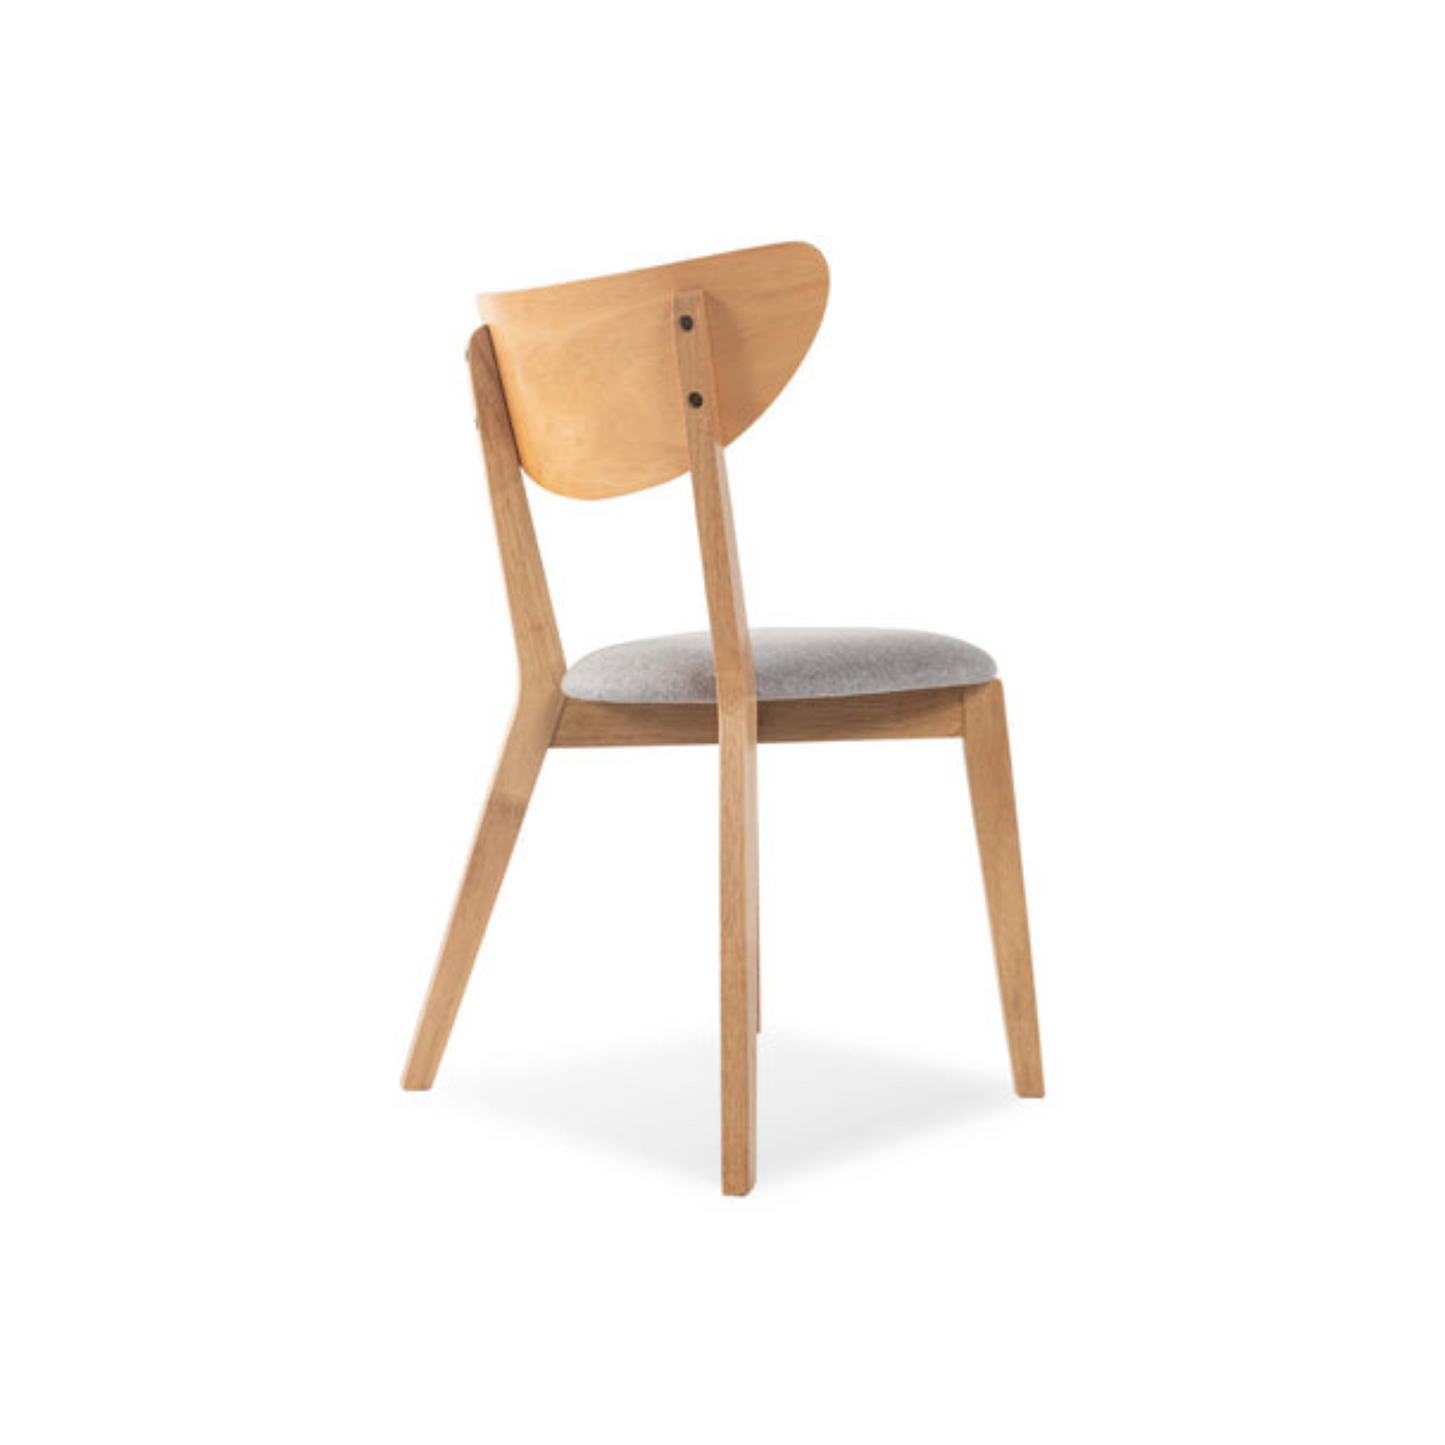 Hazel Dining Chair in Natural